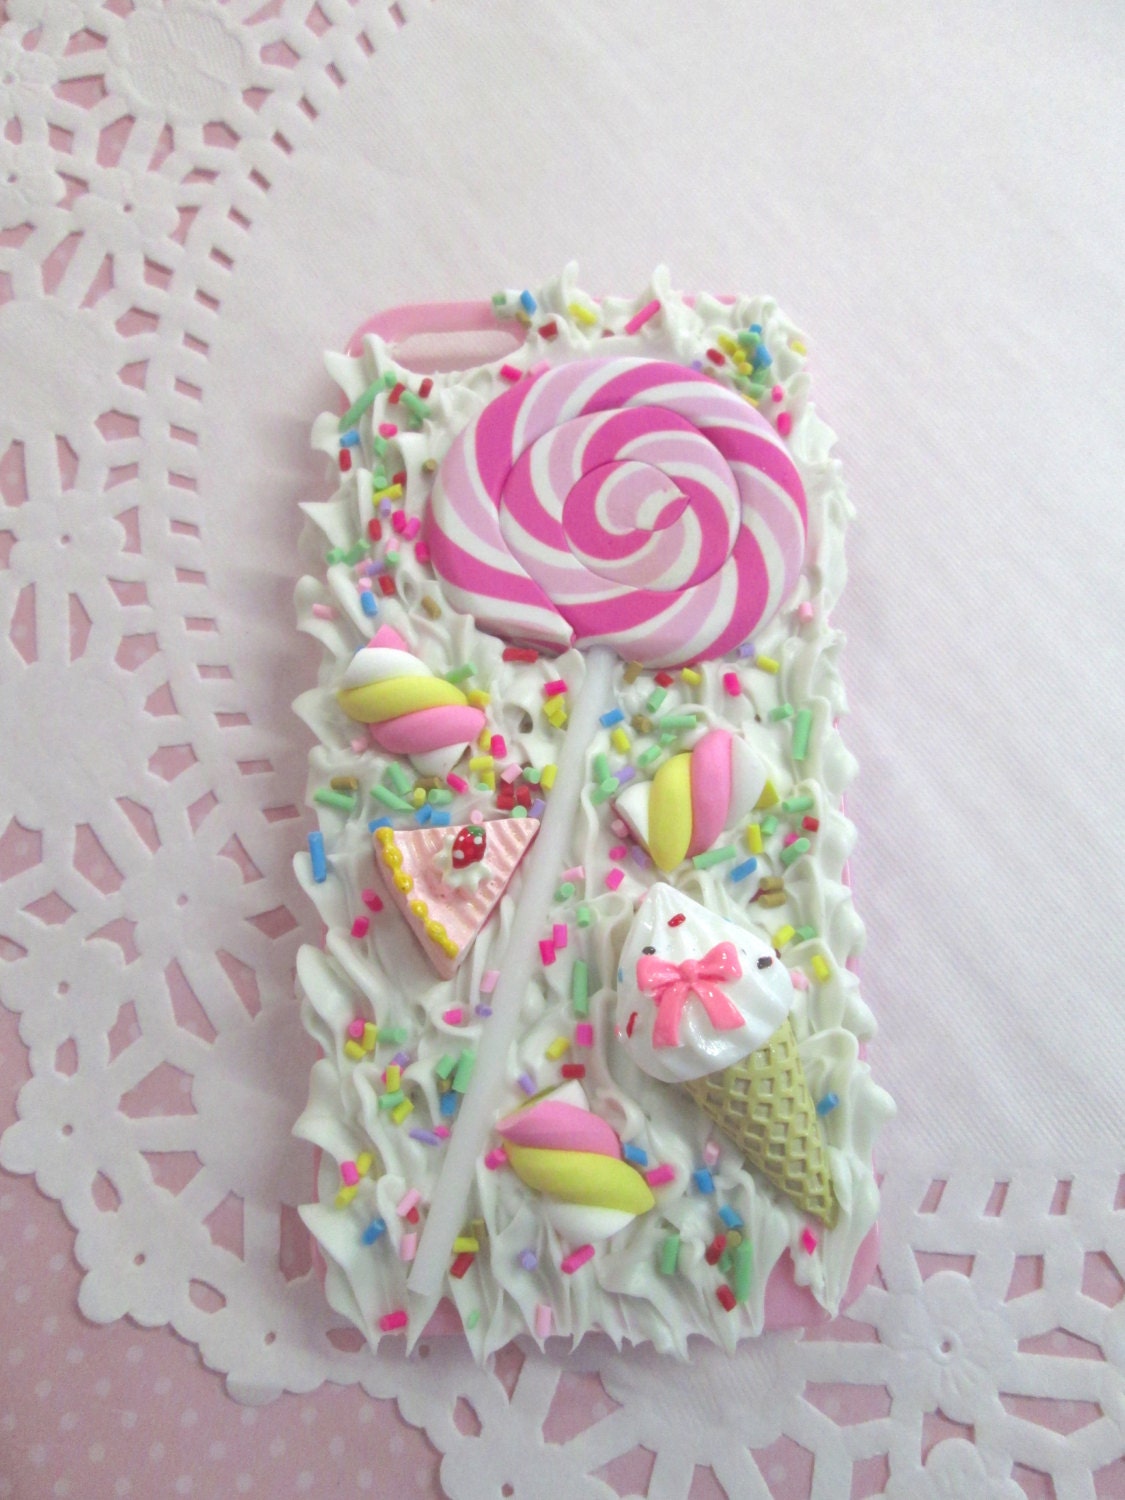 Decoden Whipped Cream Glue, Bright Mint Green Color, for Cell Phone De –  Happy Kawaii Supplies